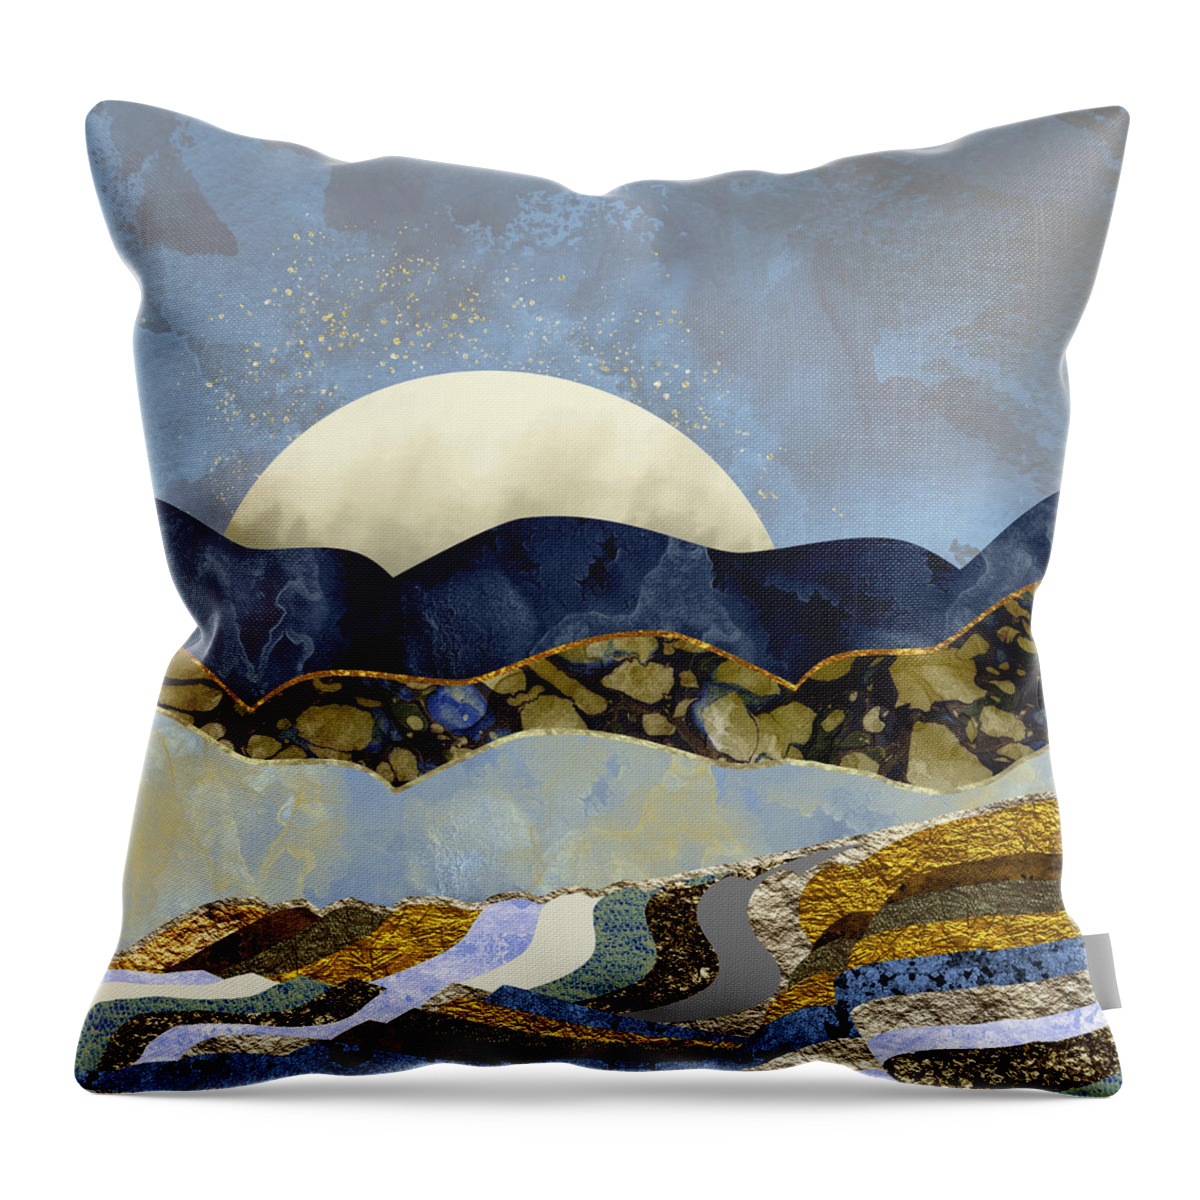 Sky Throw Pillow featuring the digital art Firefly Sky by Katherine Smit